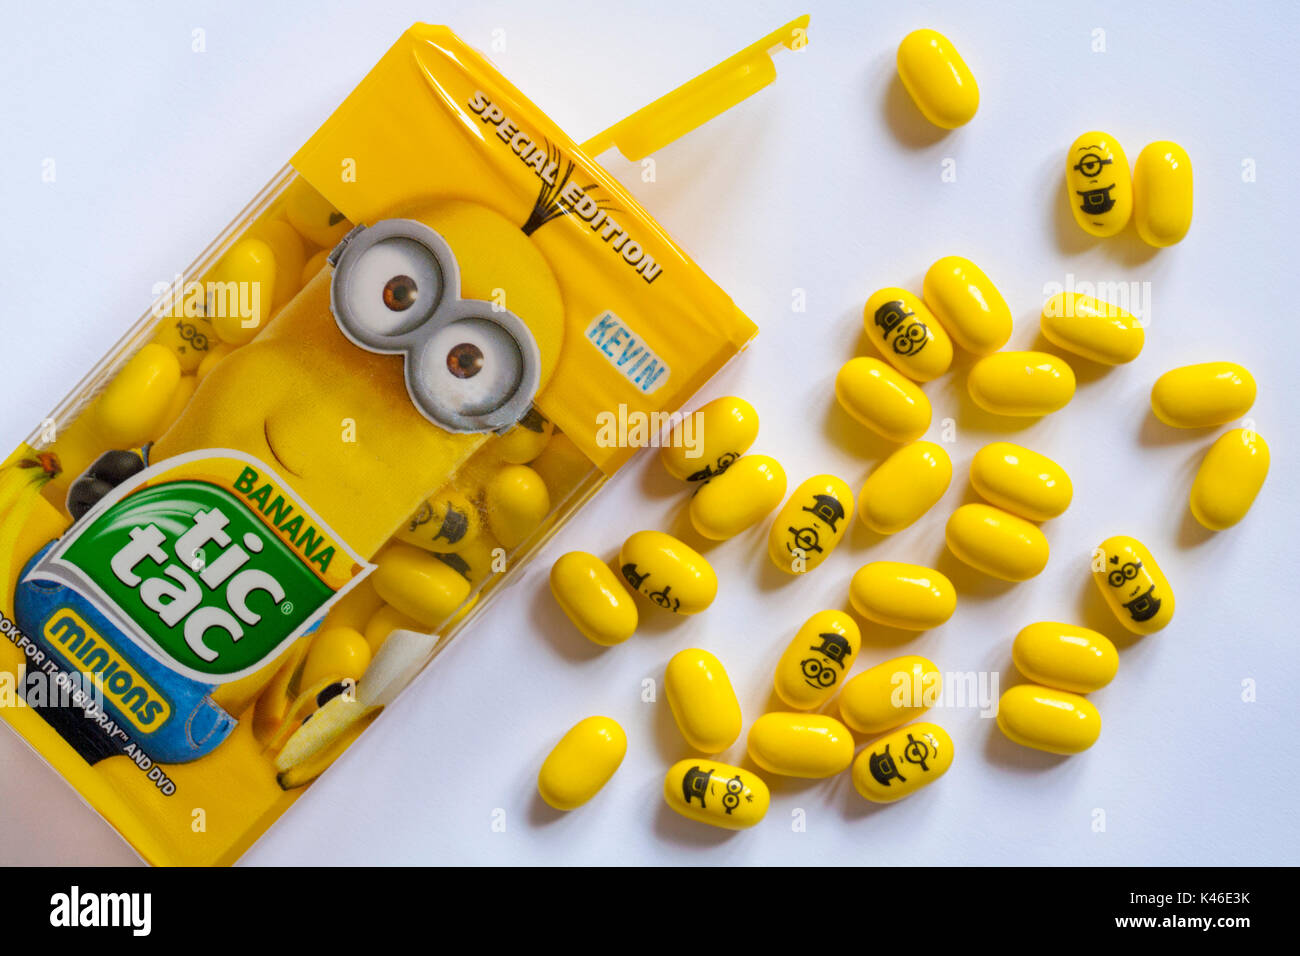 minions banana tic tac special edition open with contents spilled  set on white background Stock Photo